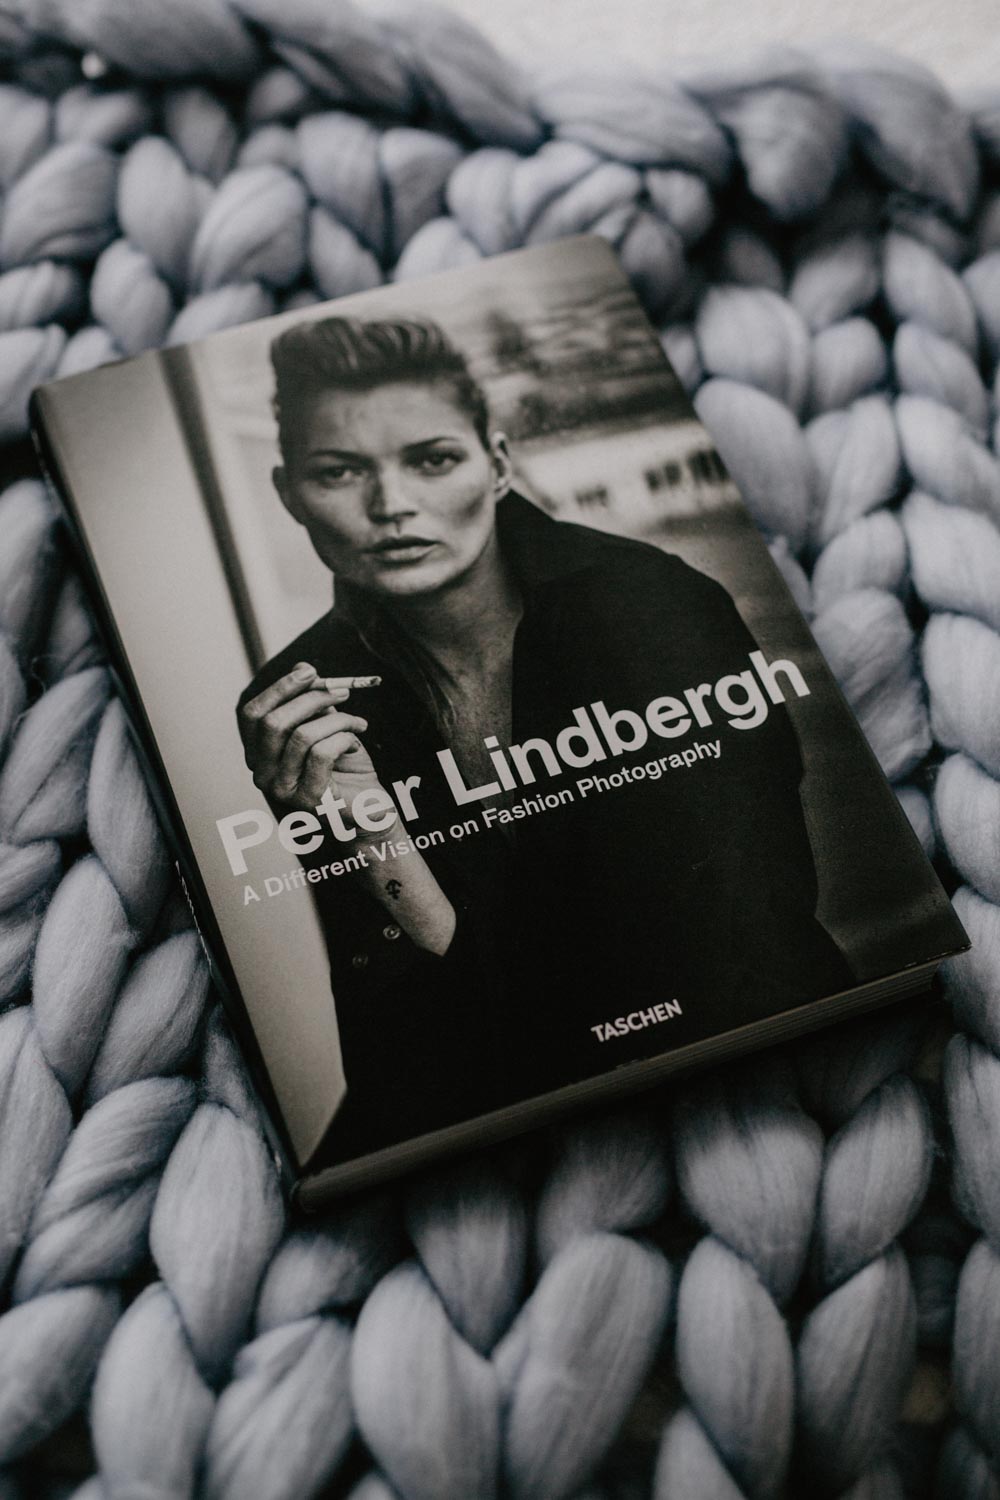 Book Review:  A Different Vision On Fashion Photography by Peter Lindbergh